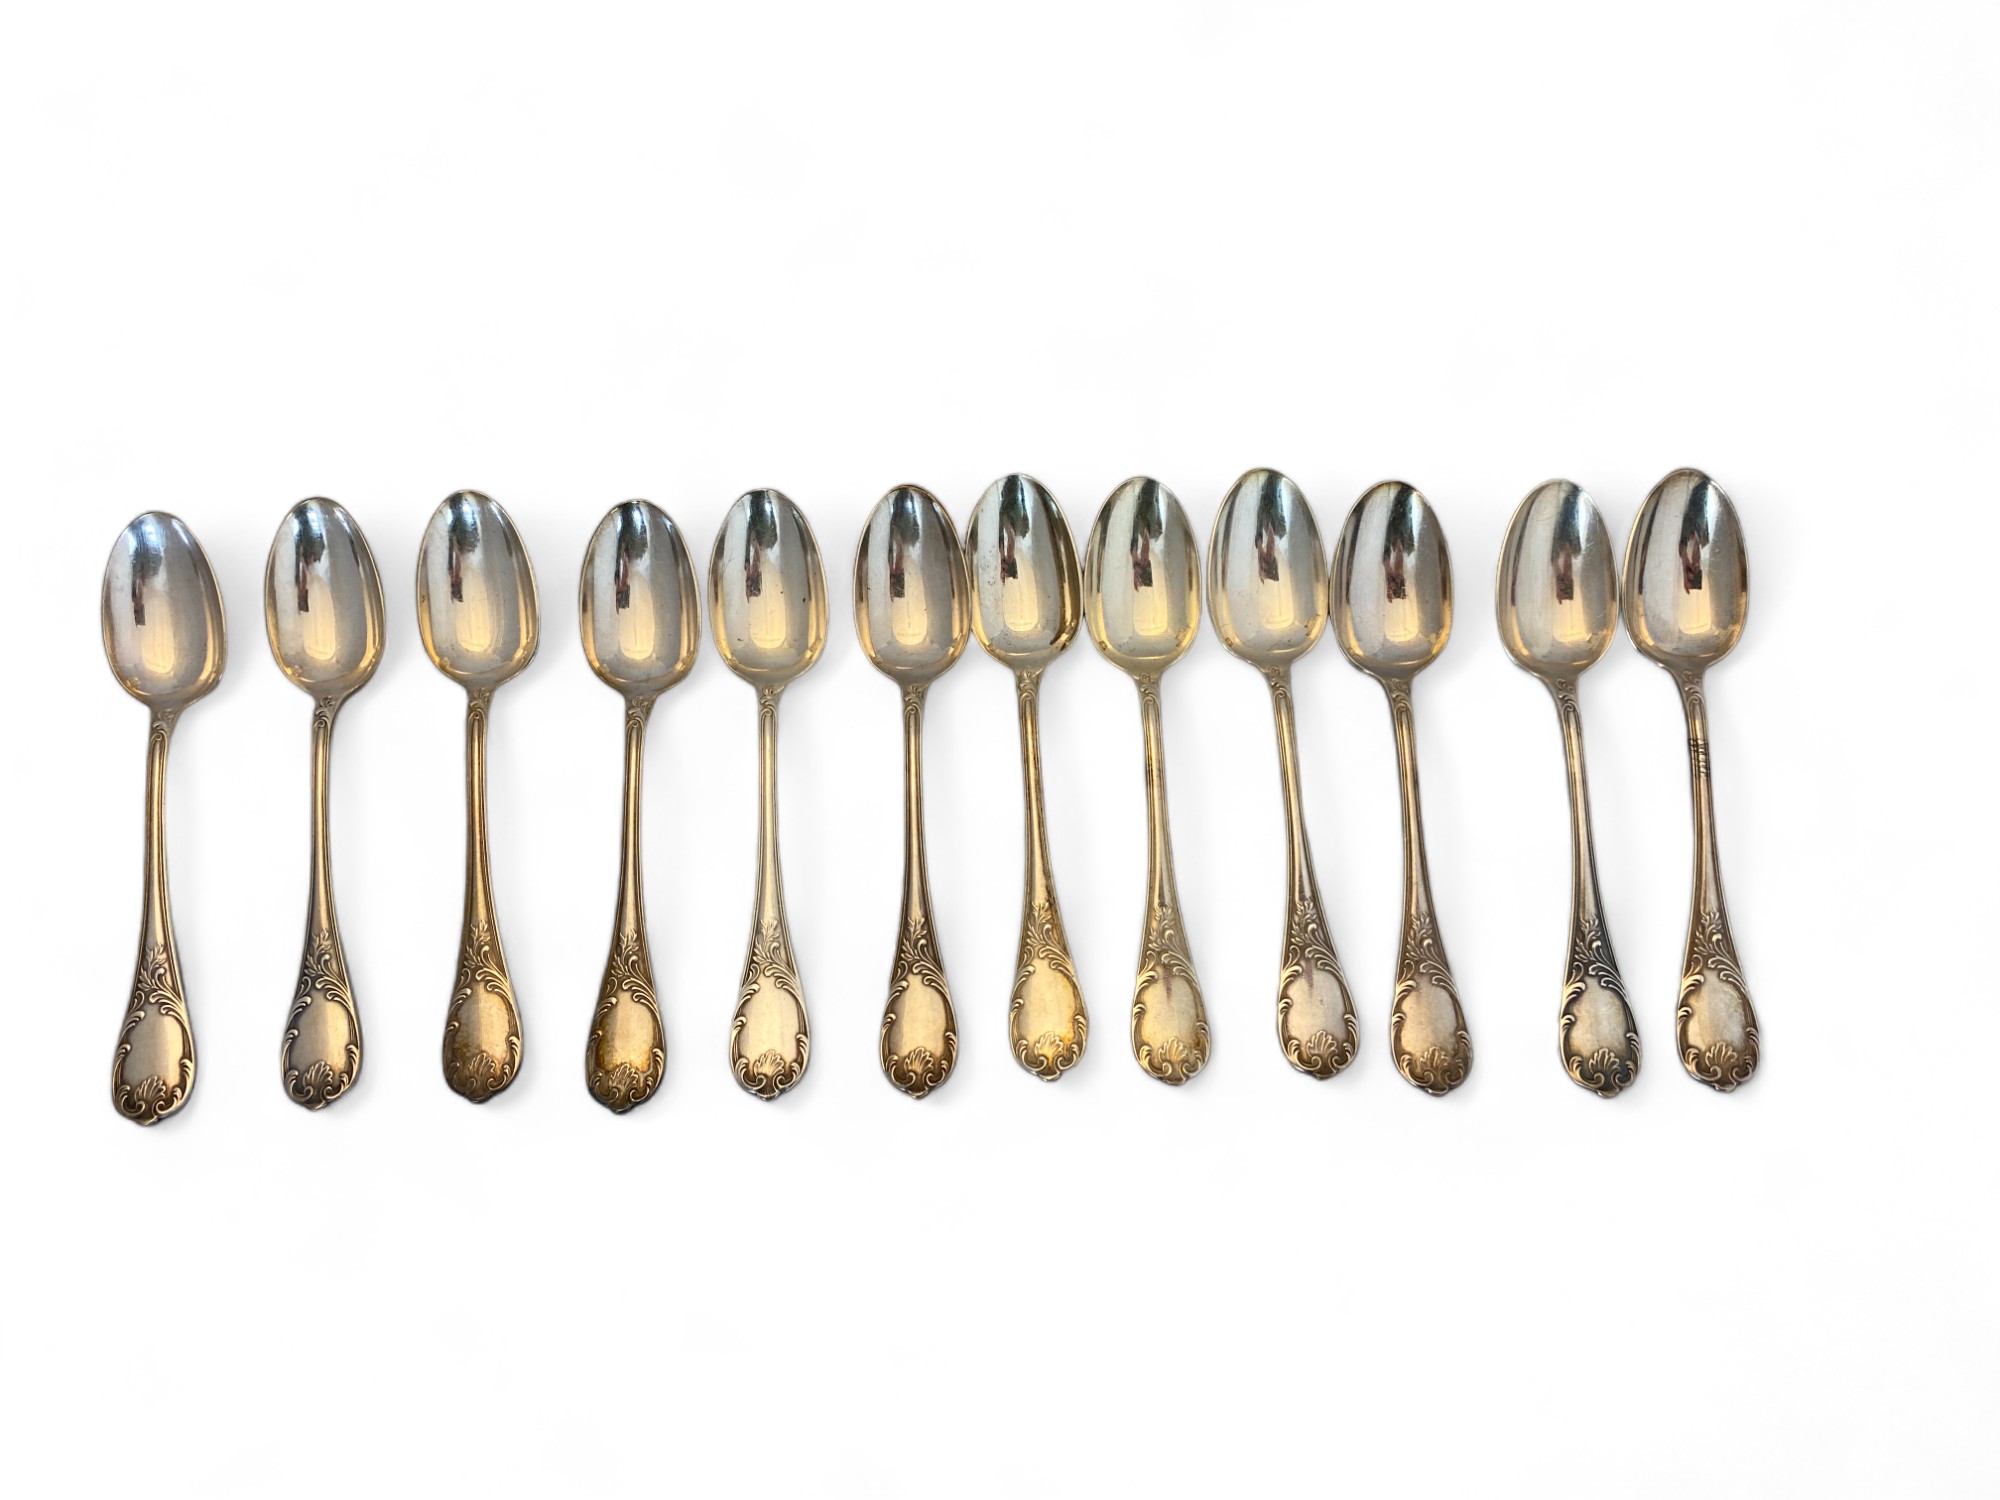 An extensive composite canteen of mostly silver plated Marly pattern cutlery by Christofle, Paris - Image 36 of 99